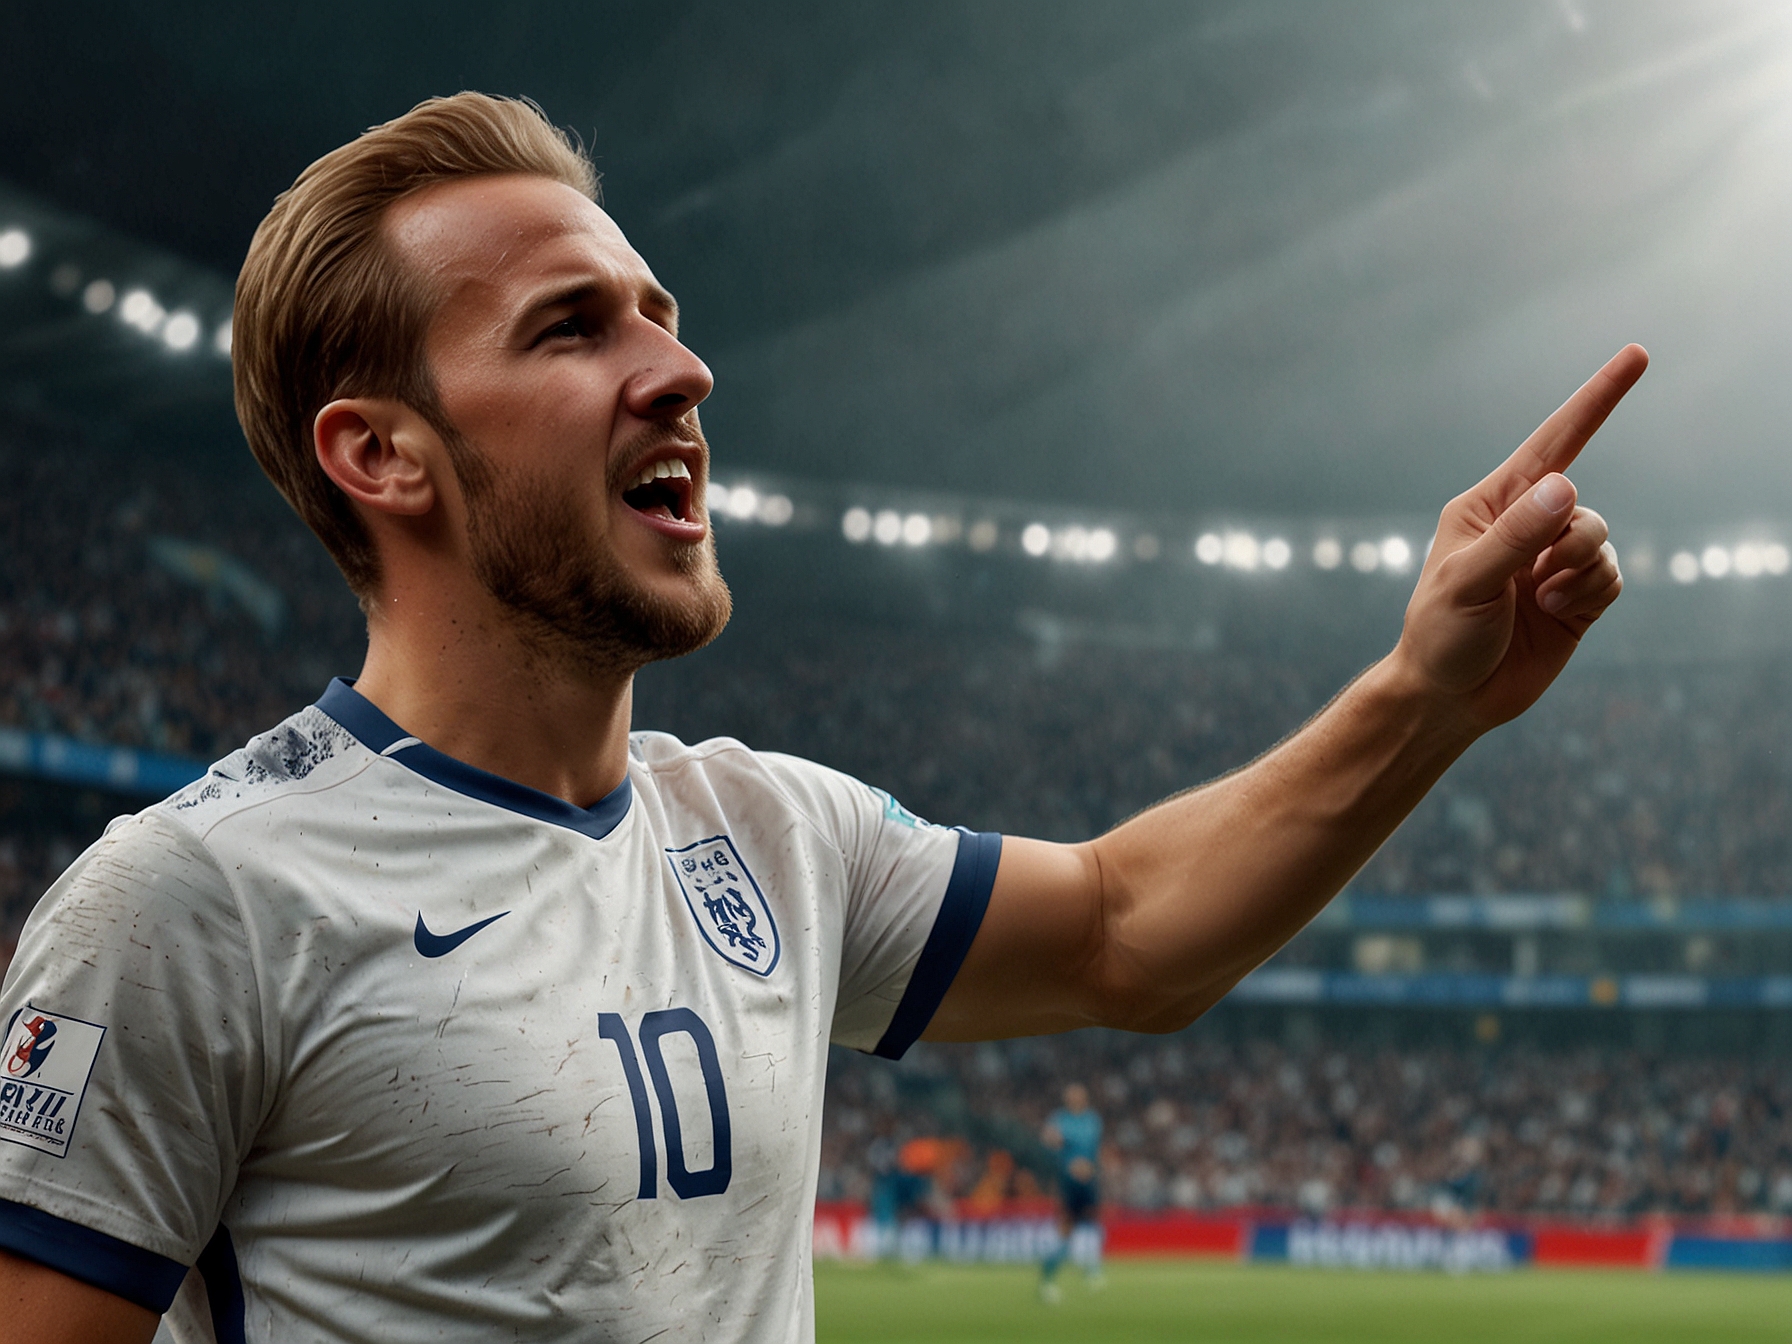 Harry Kane points to the sky after scoring a goal, reflecting gratitude and emotional depth, a gesture decoded by body language experts during his Euro 2024 matches.